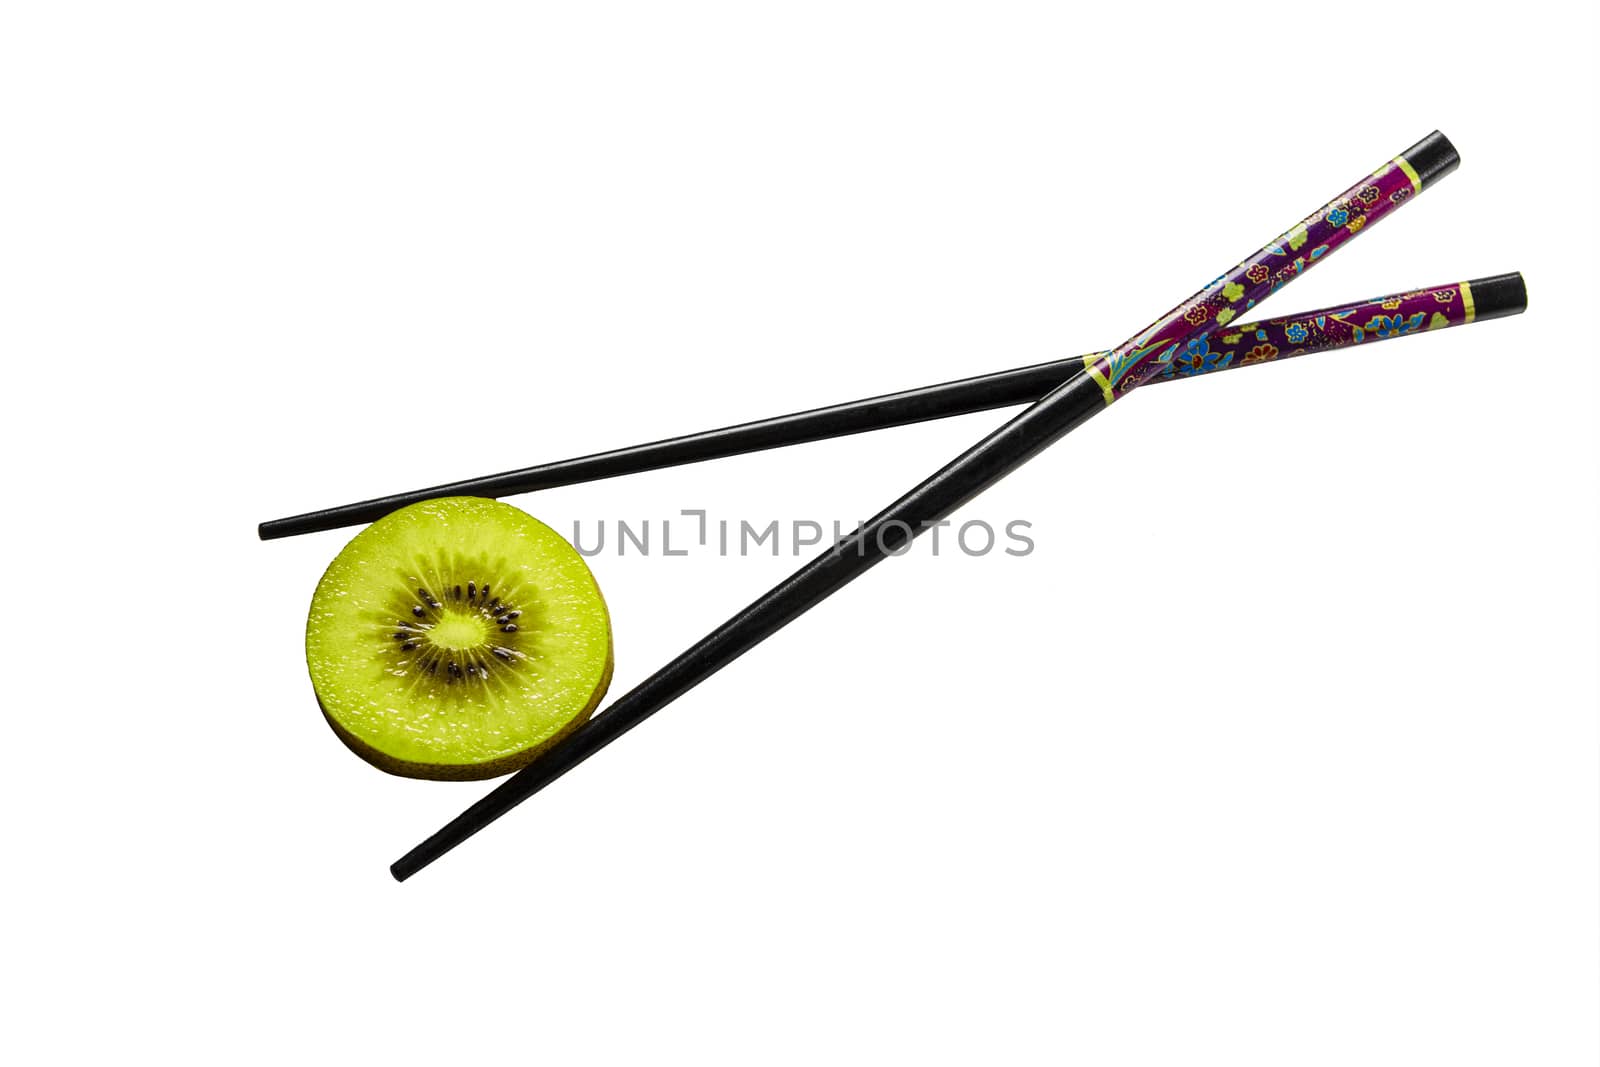 Kiwi one sliced slice and crossed Chinese sticks on a white back by ben44